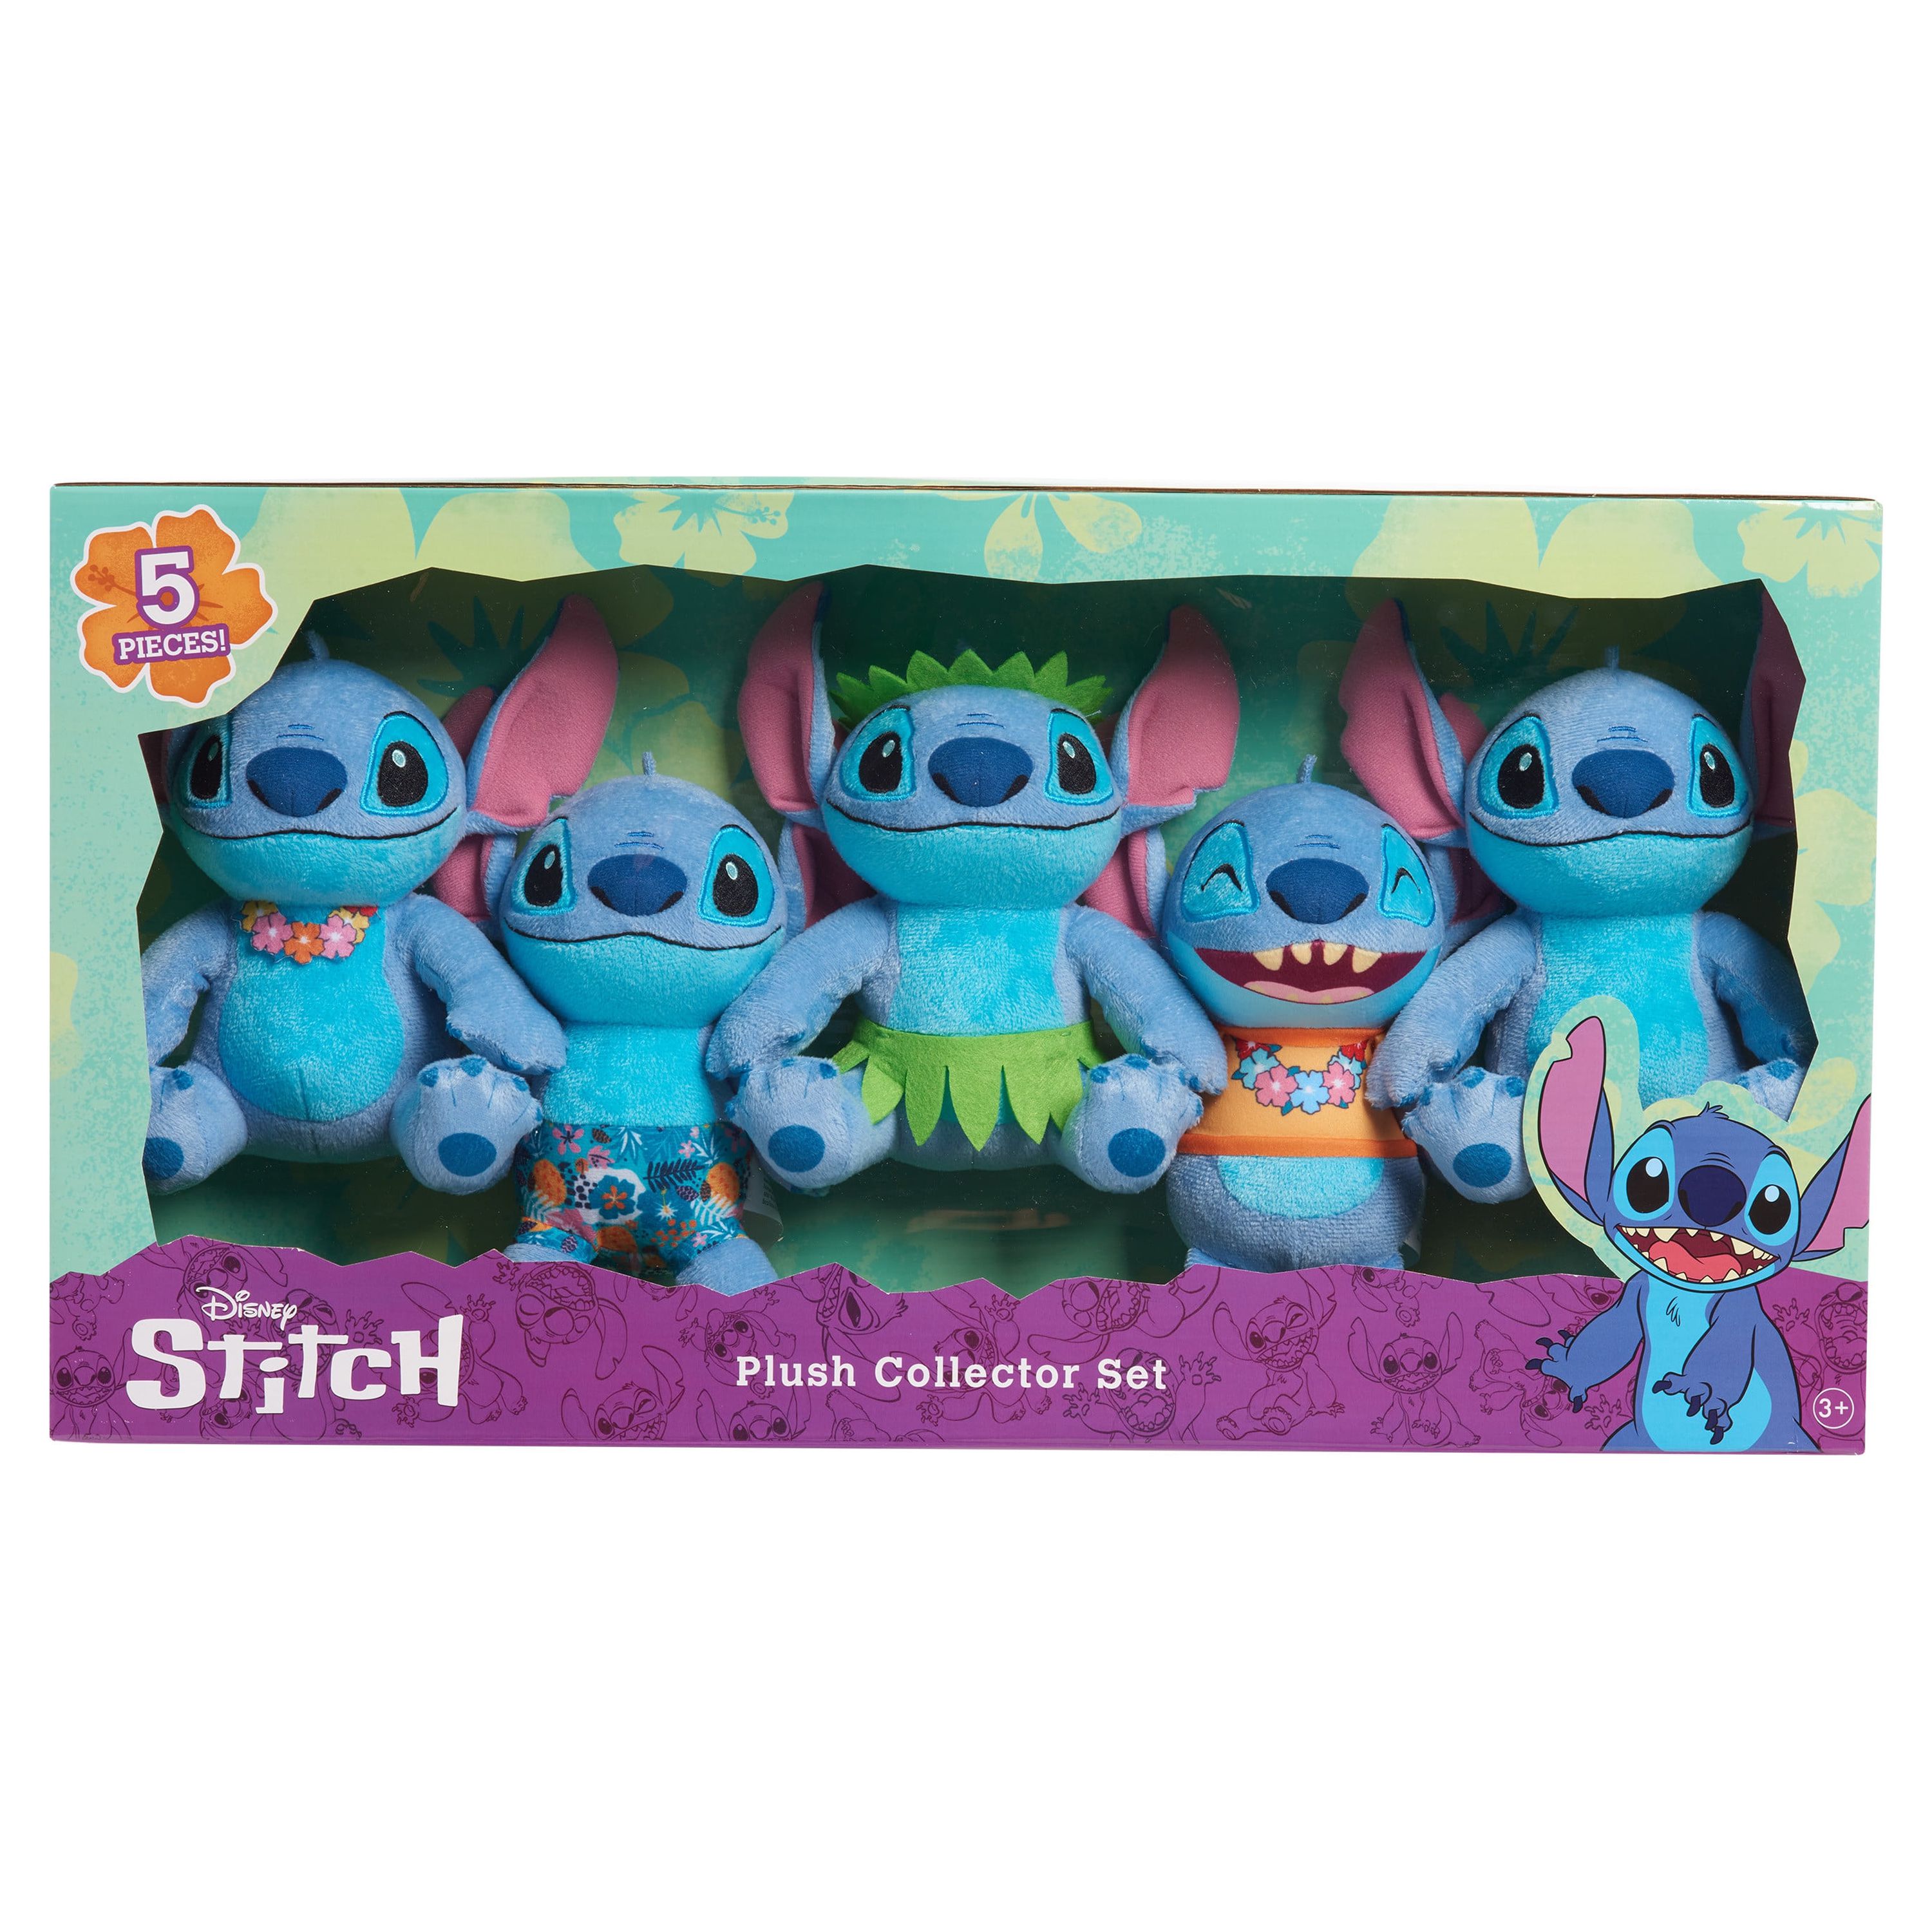 Disney Stitch Plush Collector Set, Officially Licensed Kids Toys for Ages 3 Up, Gifts and Presents - image 3 of 4